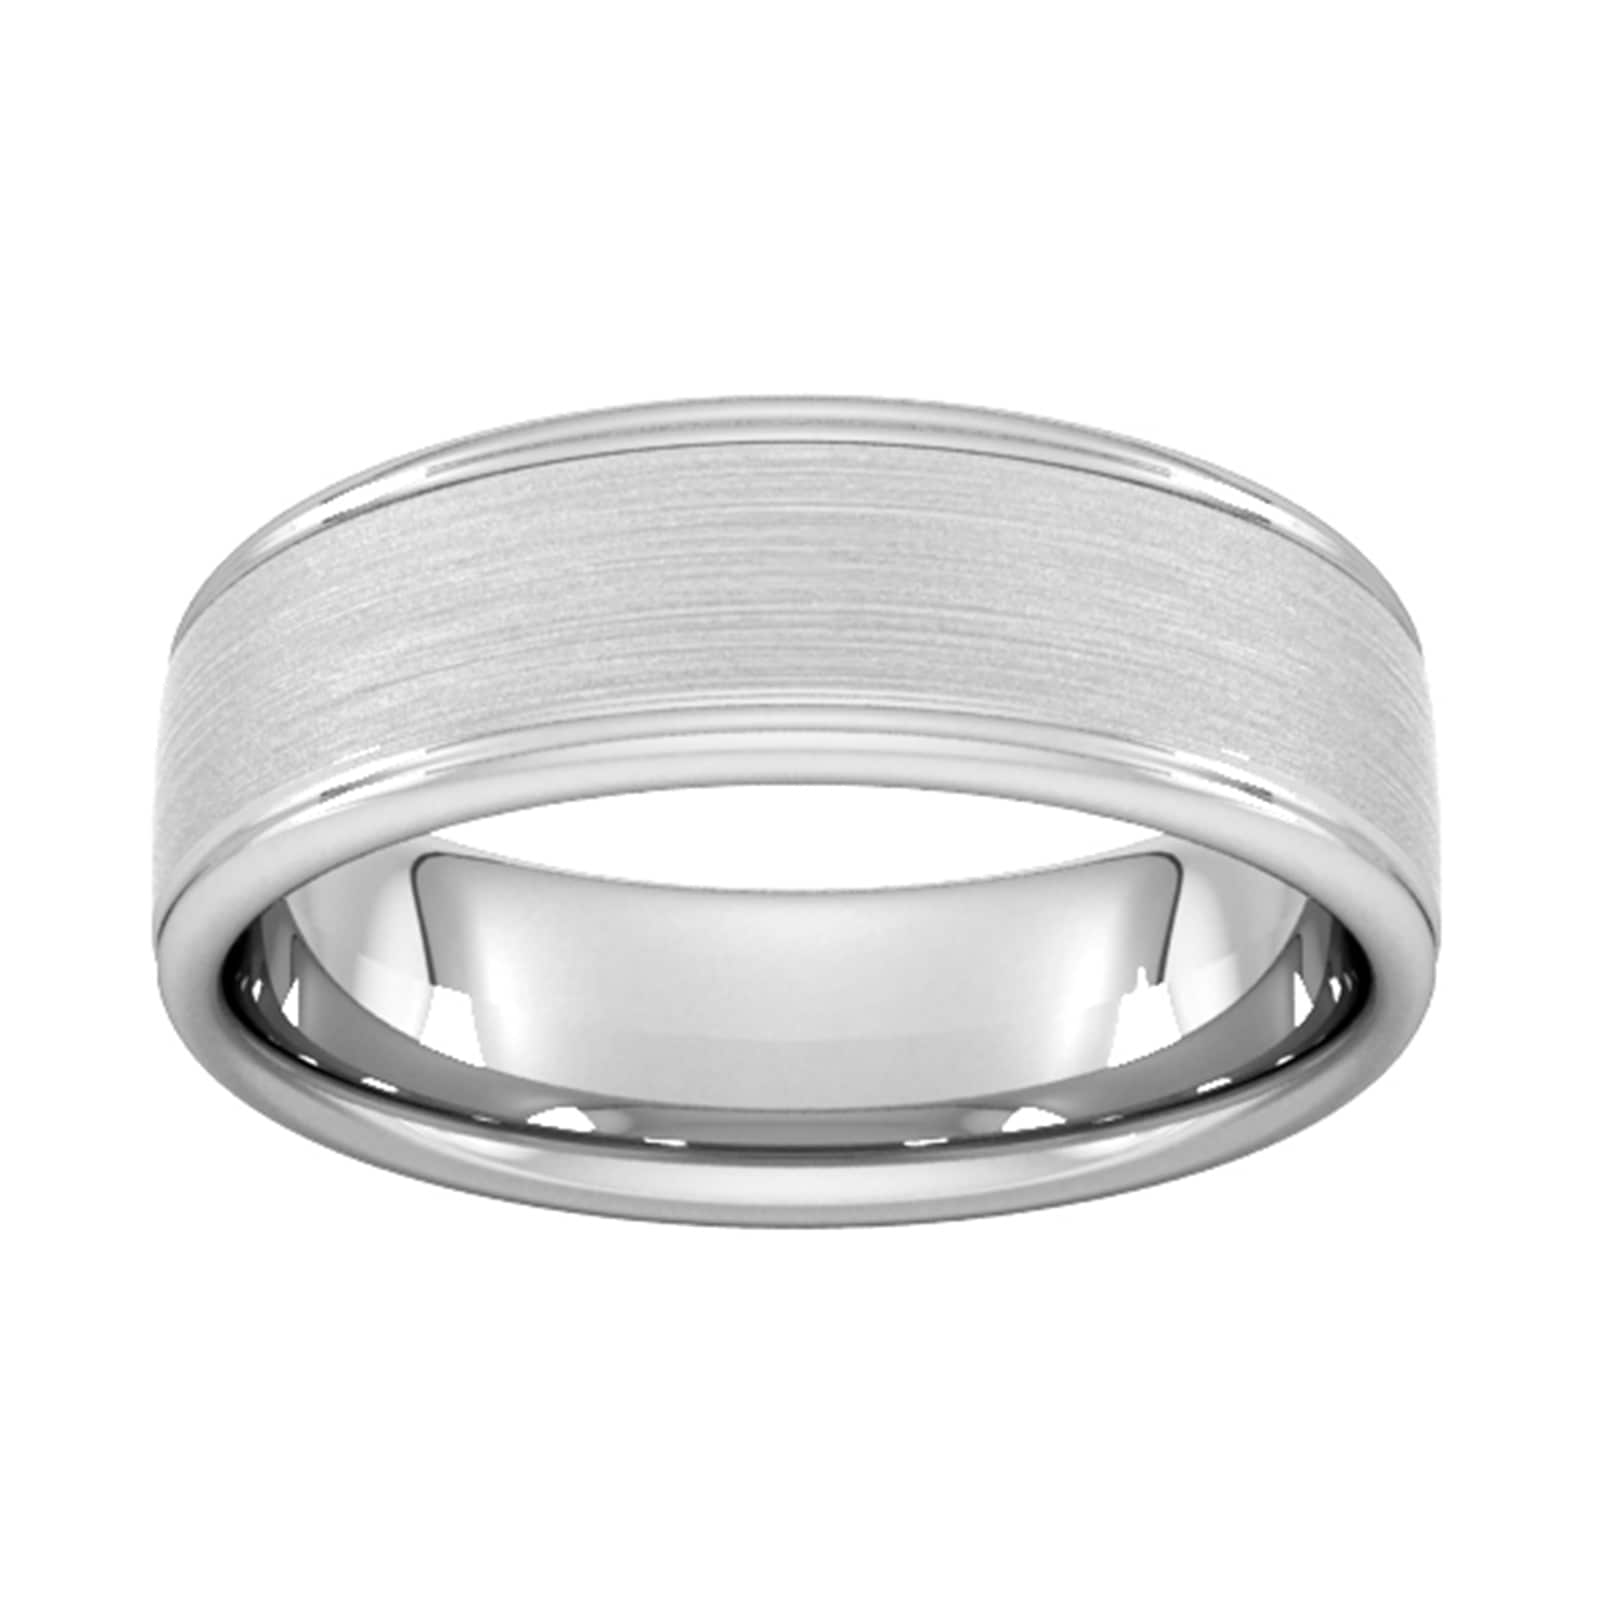 7mm D Shape Standard Matt Centre With Grooves Wedding Ring In Platinum - Ring Size L